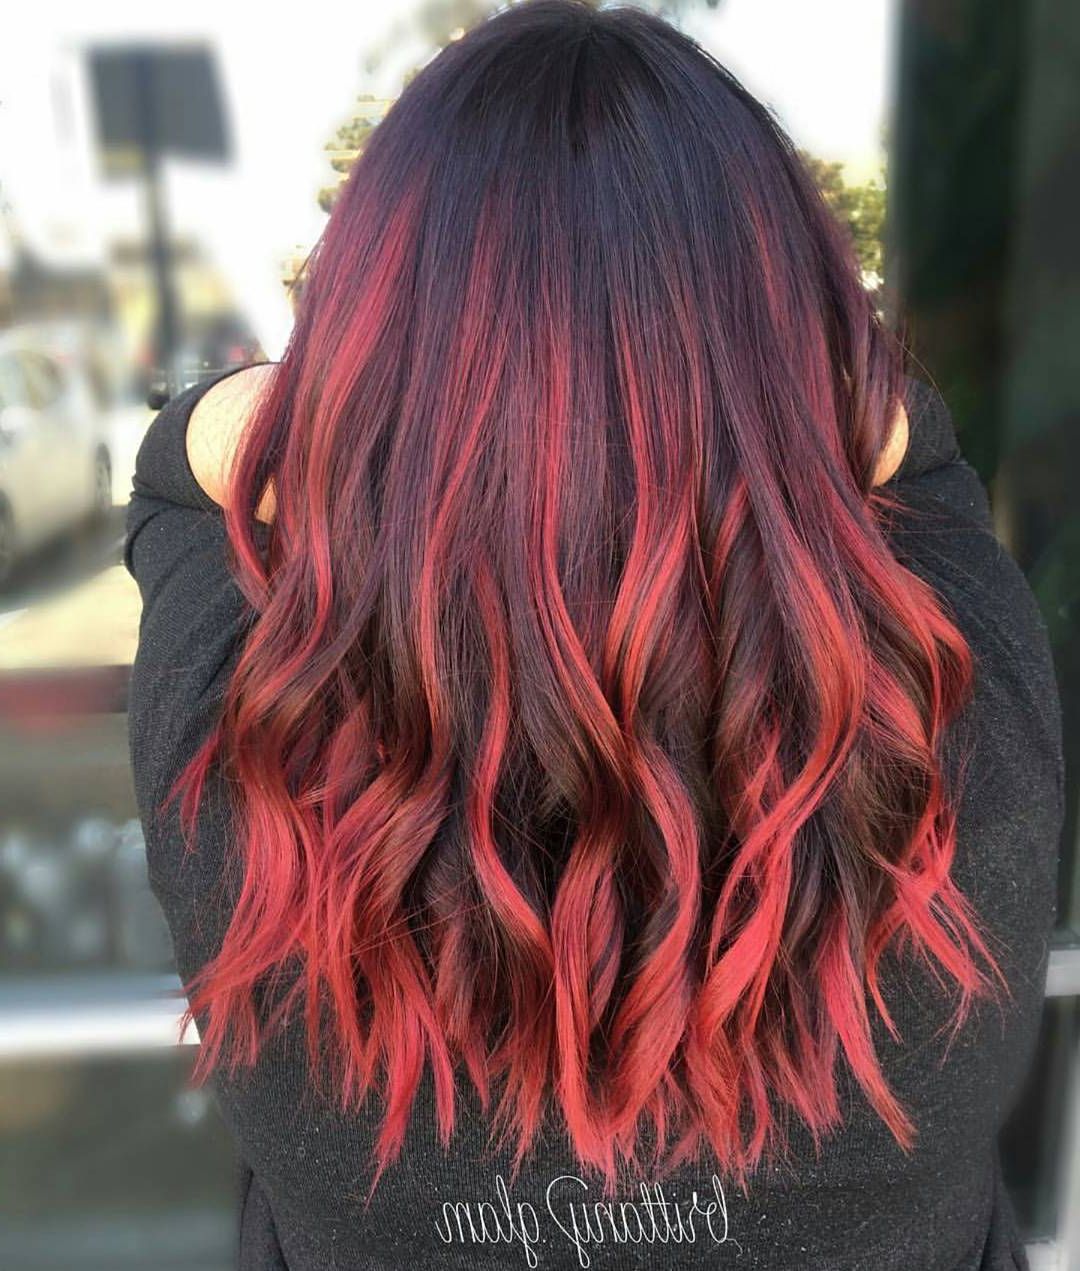 10 Medium Length Hairstyles For Thick Hair In Super Sexy Colors Inside 2018 Medium Hairstyles With Red Hair (View 4 of 20)